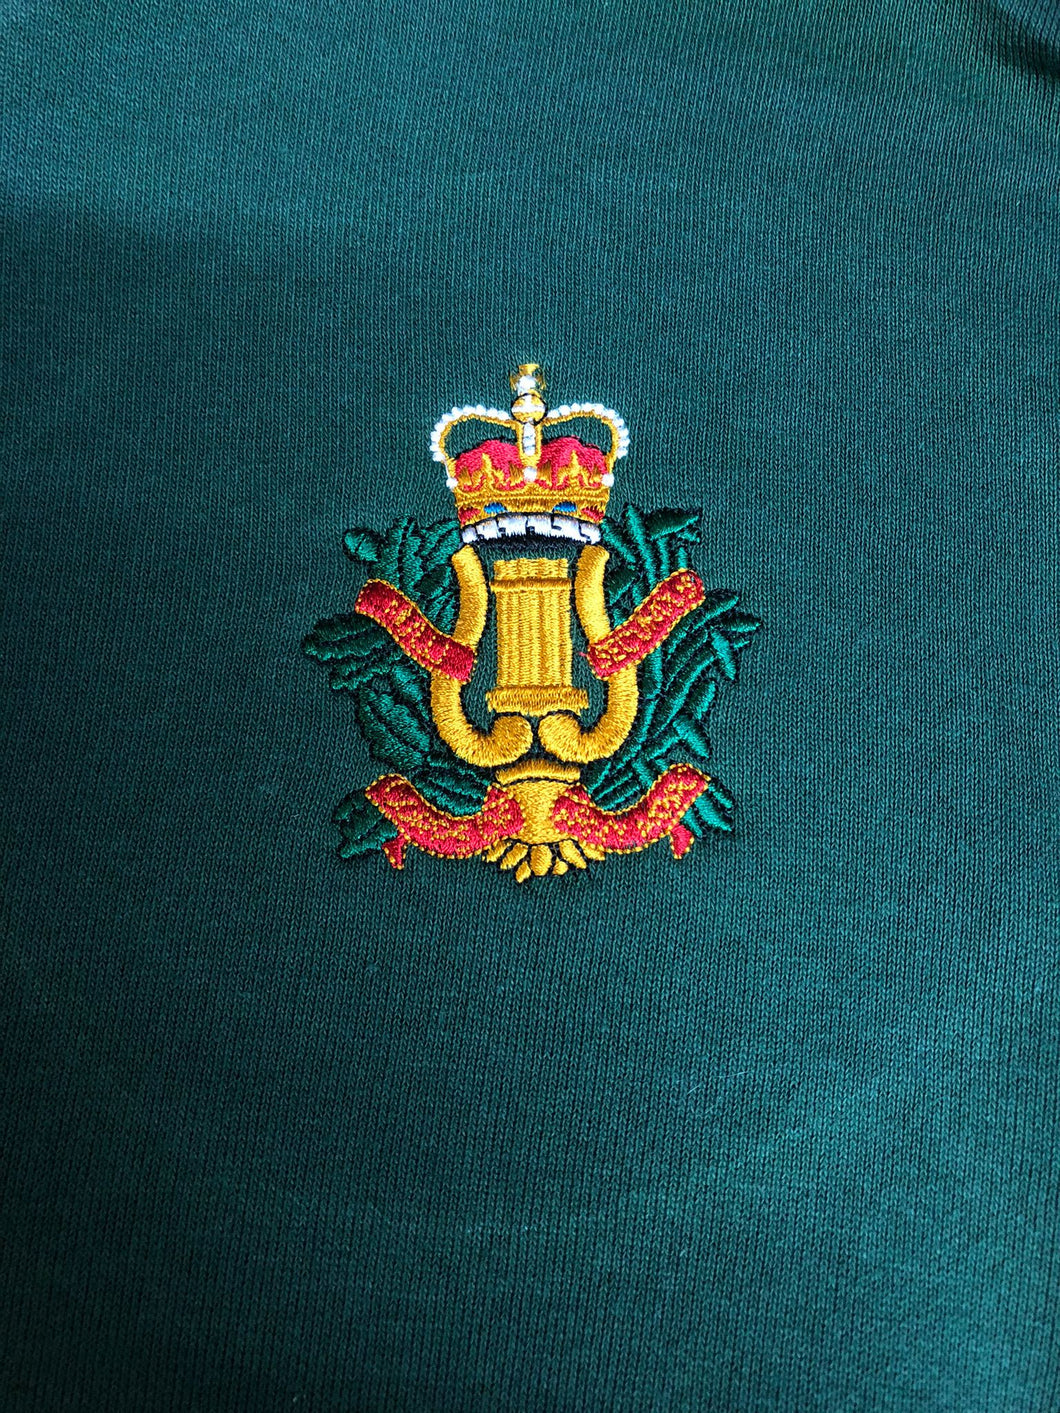 Copy of The Royal Corps of Army Music (CAMUS) Colour- Embroidered - Choose your Garment